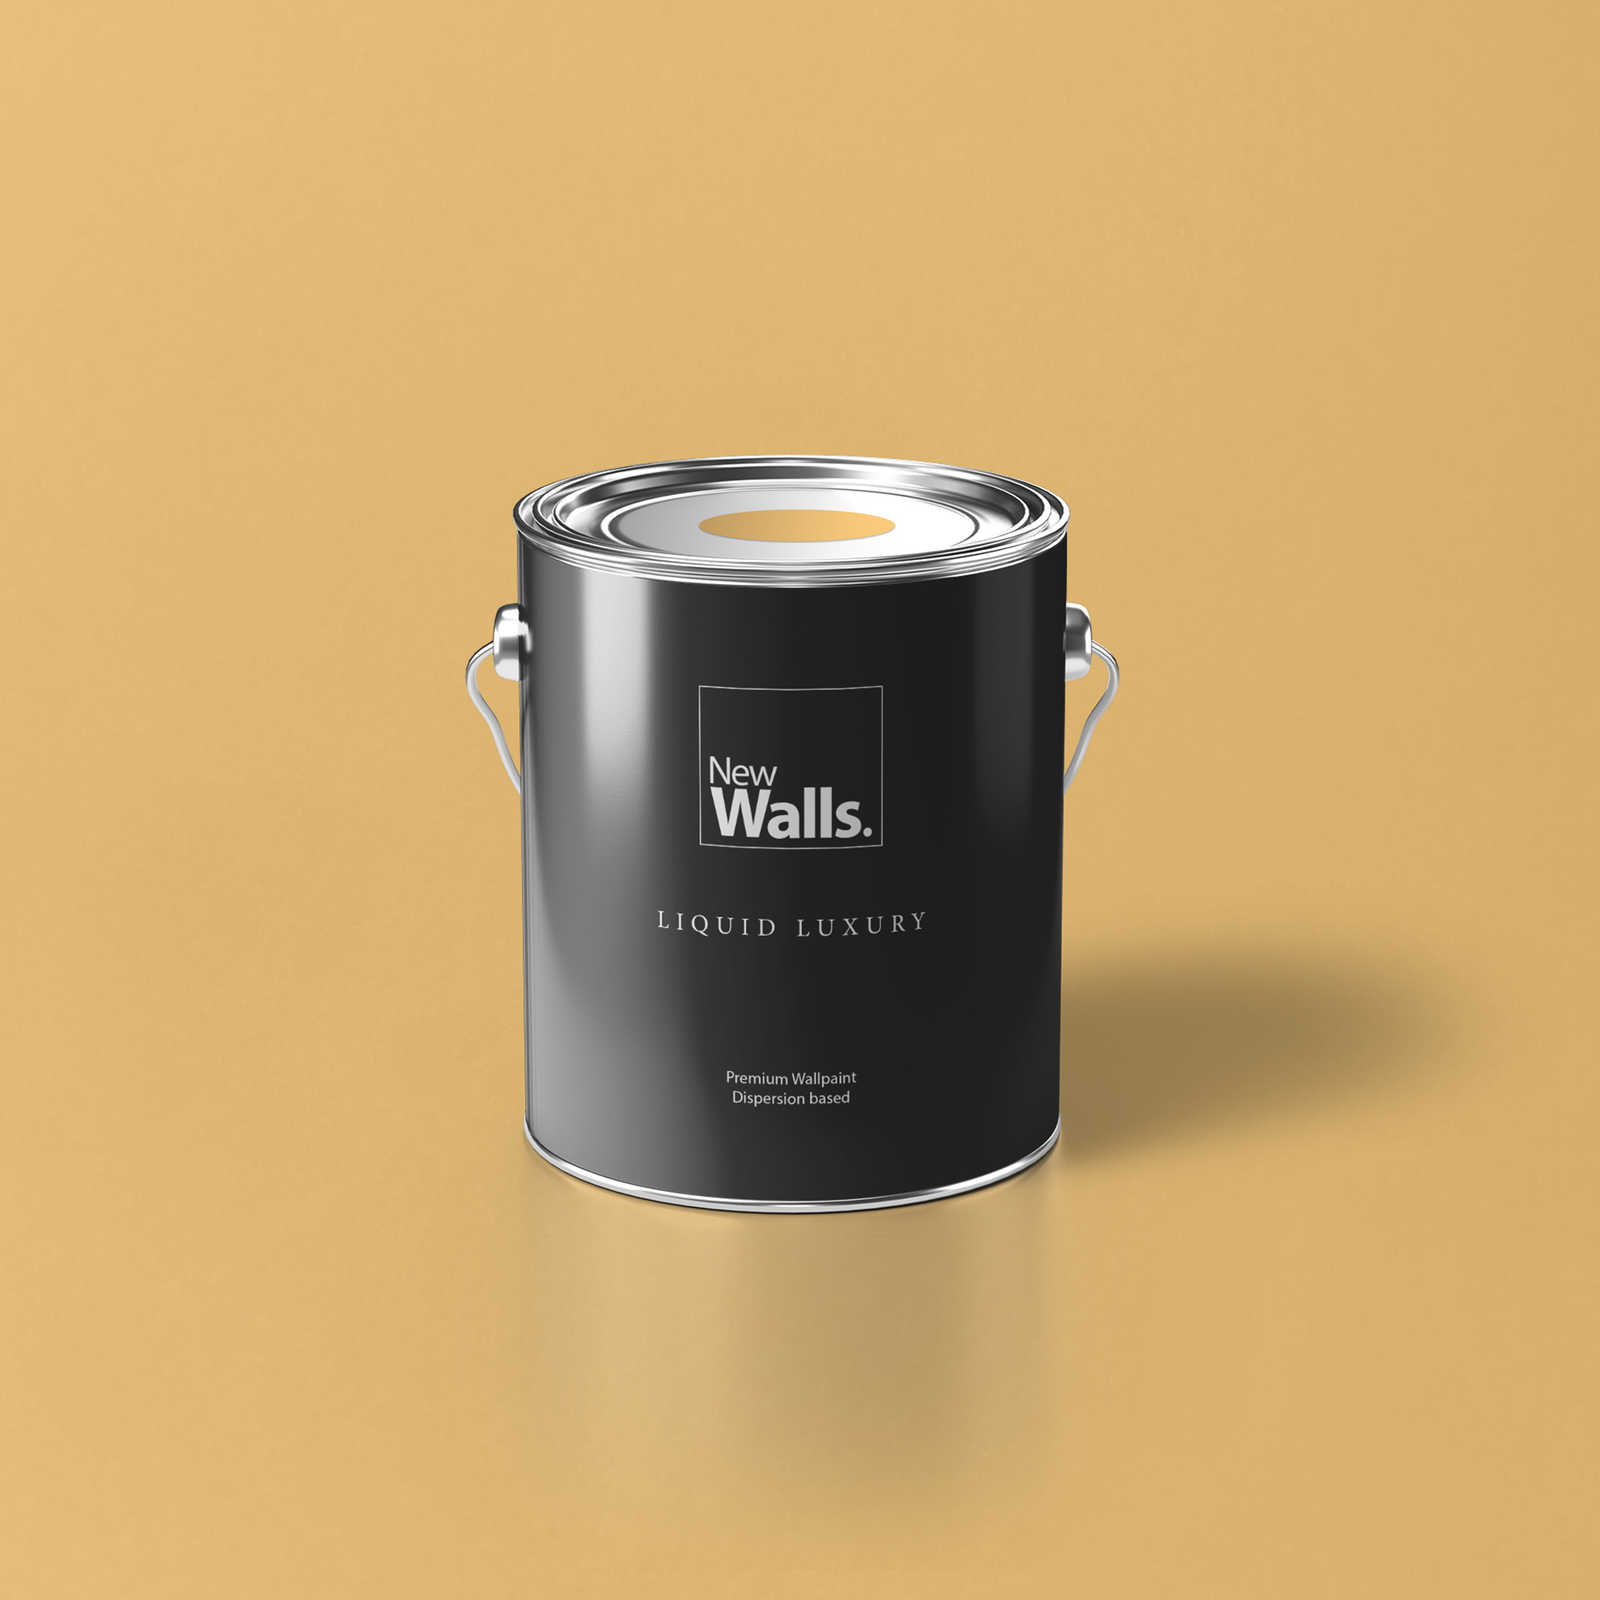 Premium Wall Paint cheerful gold »Juicy Yellow« NW804 – 2,5 litre
